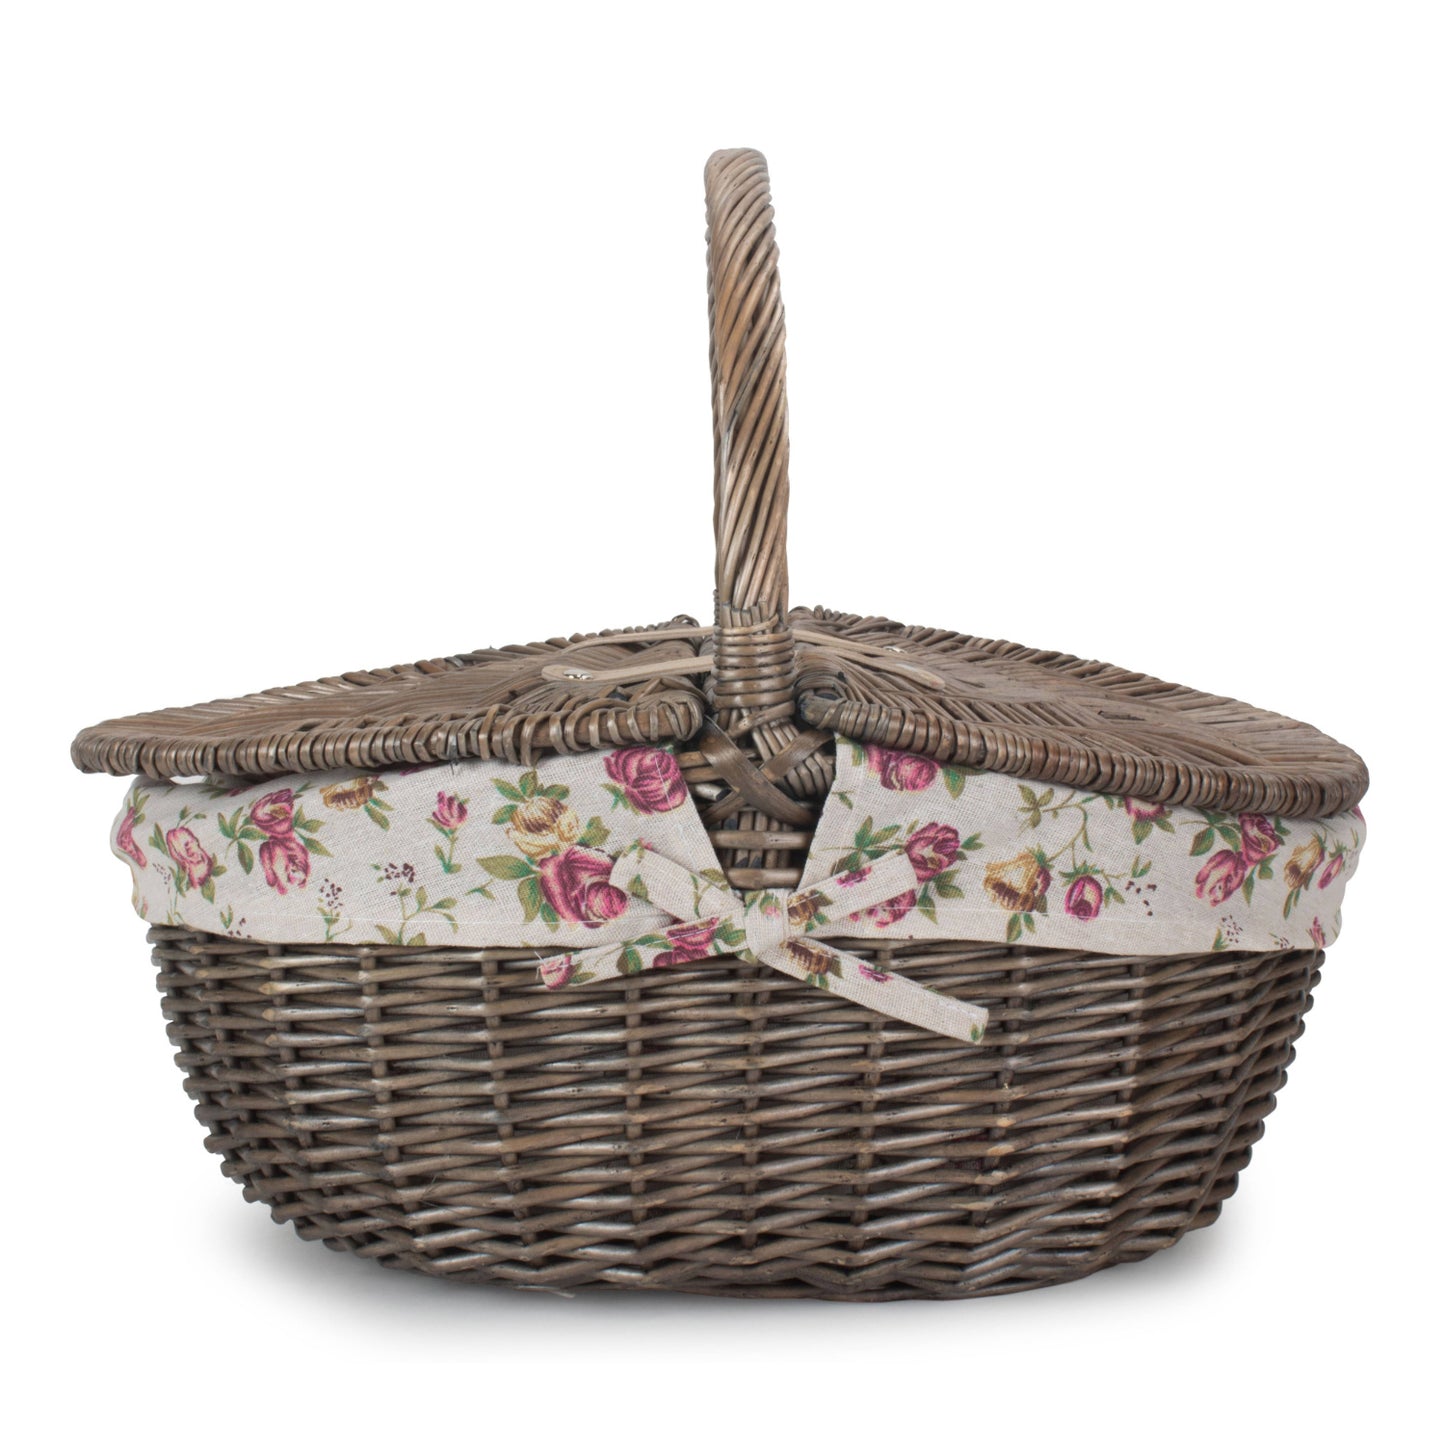 Antique Wash Finish Oval Picnic Basket With Garden Rose Lining